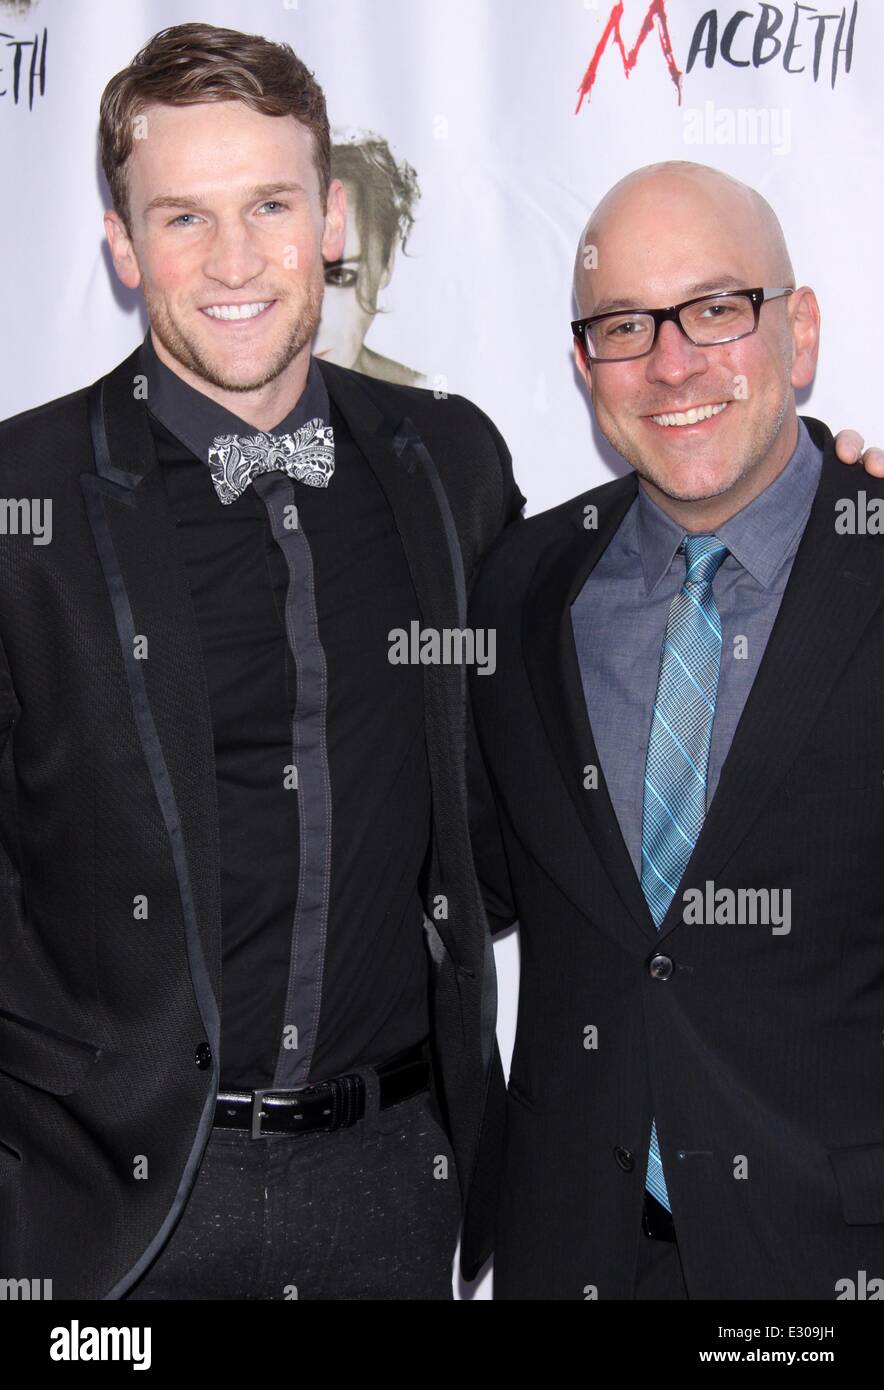 Broadway opening night for 'Macbeth' at the Ethel Barrymore Theatre - Arrivals  Featuring: Claybourne Elder,Eric Rosen Where: New York, United States When: 21 Apr 2013 Stock Photo